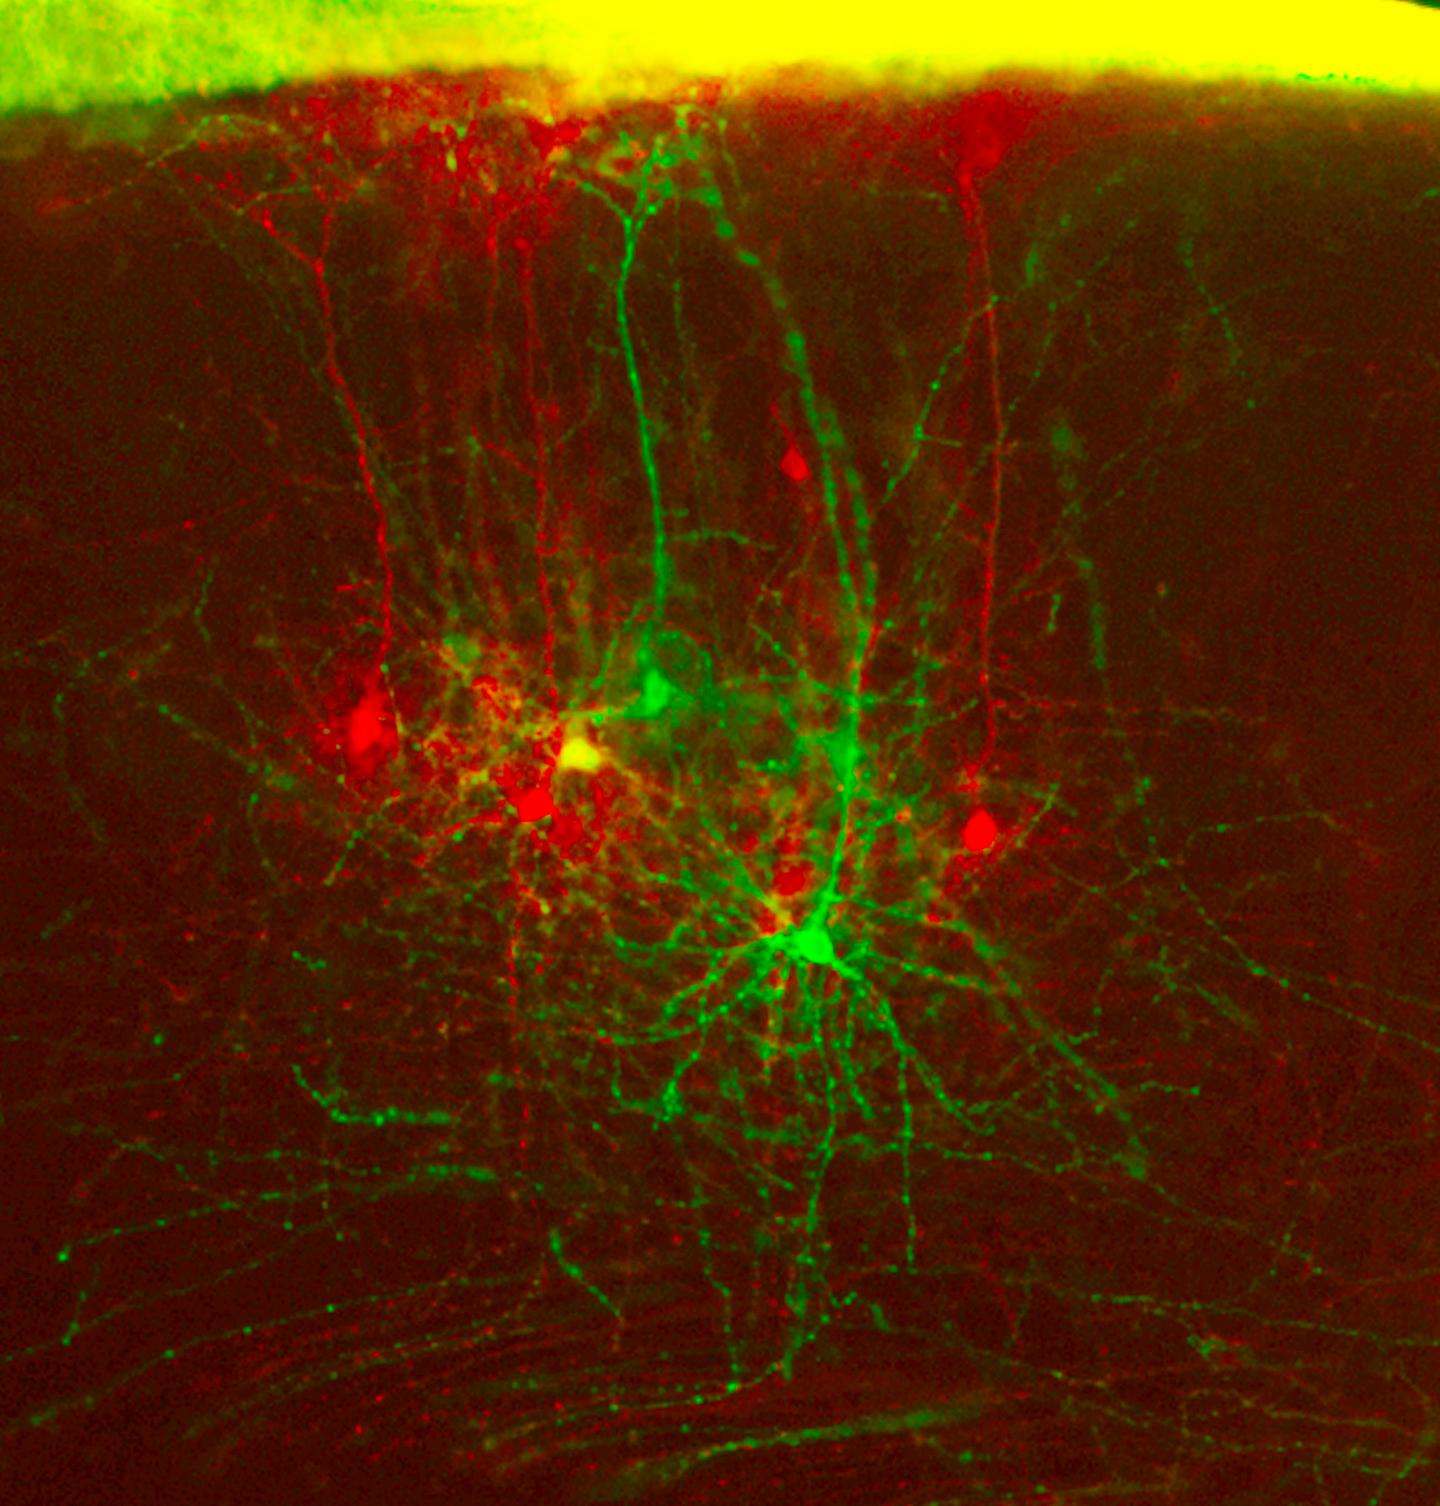 Scientists at the Salk Institute Discovered New Details into How Master Proteins Dictate Neuron's Sp